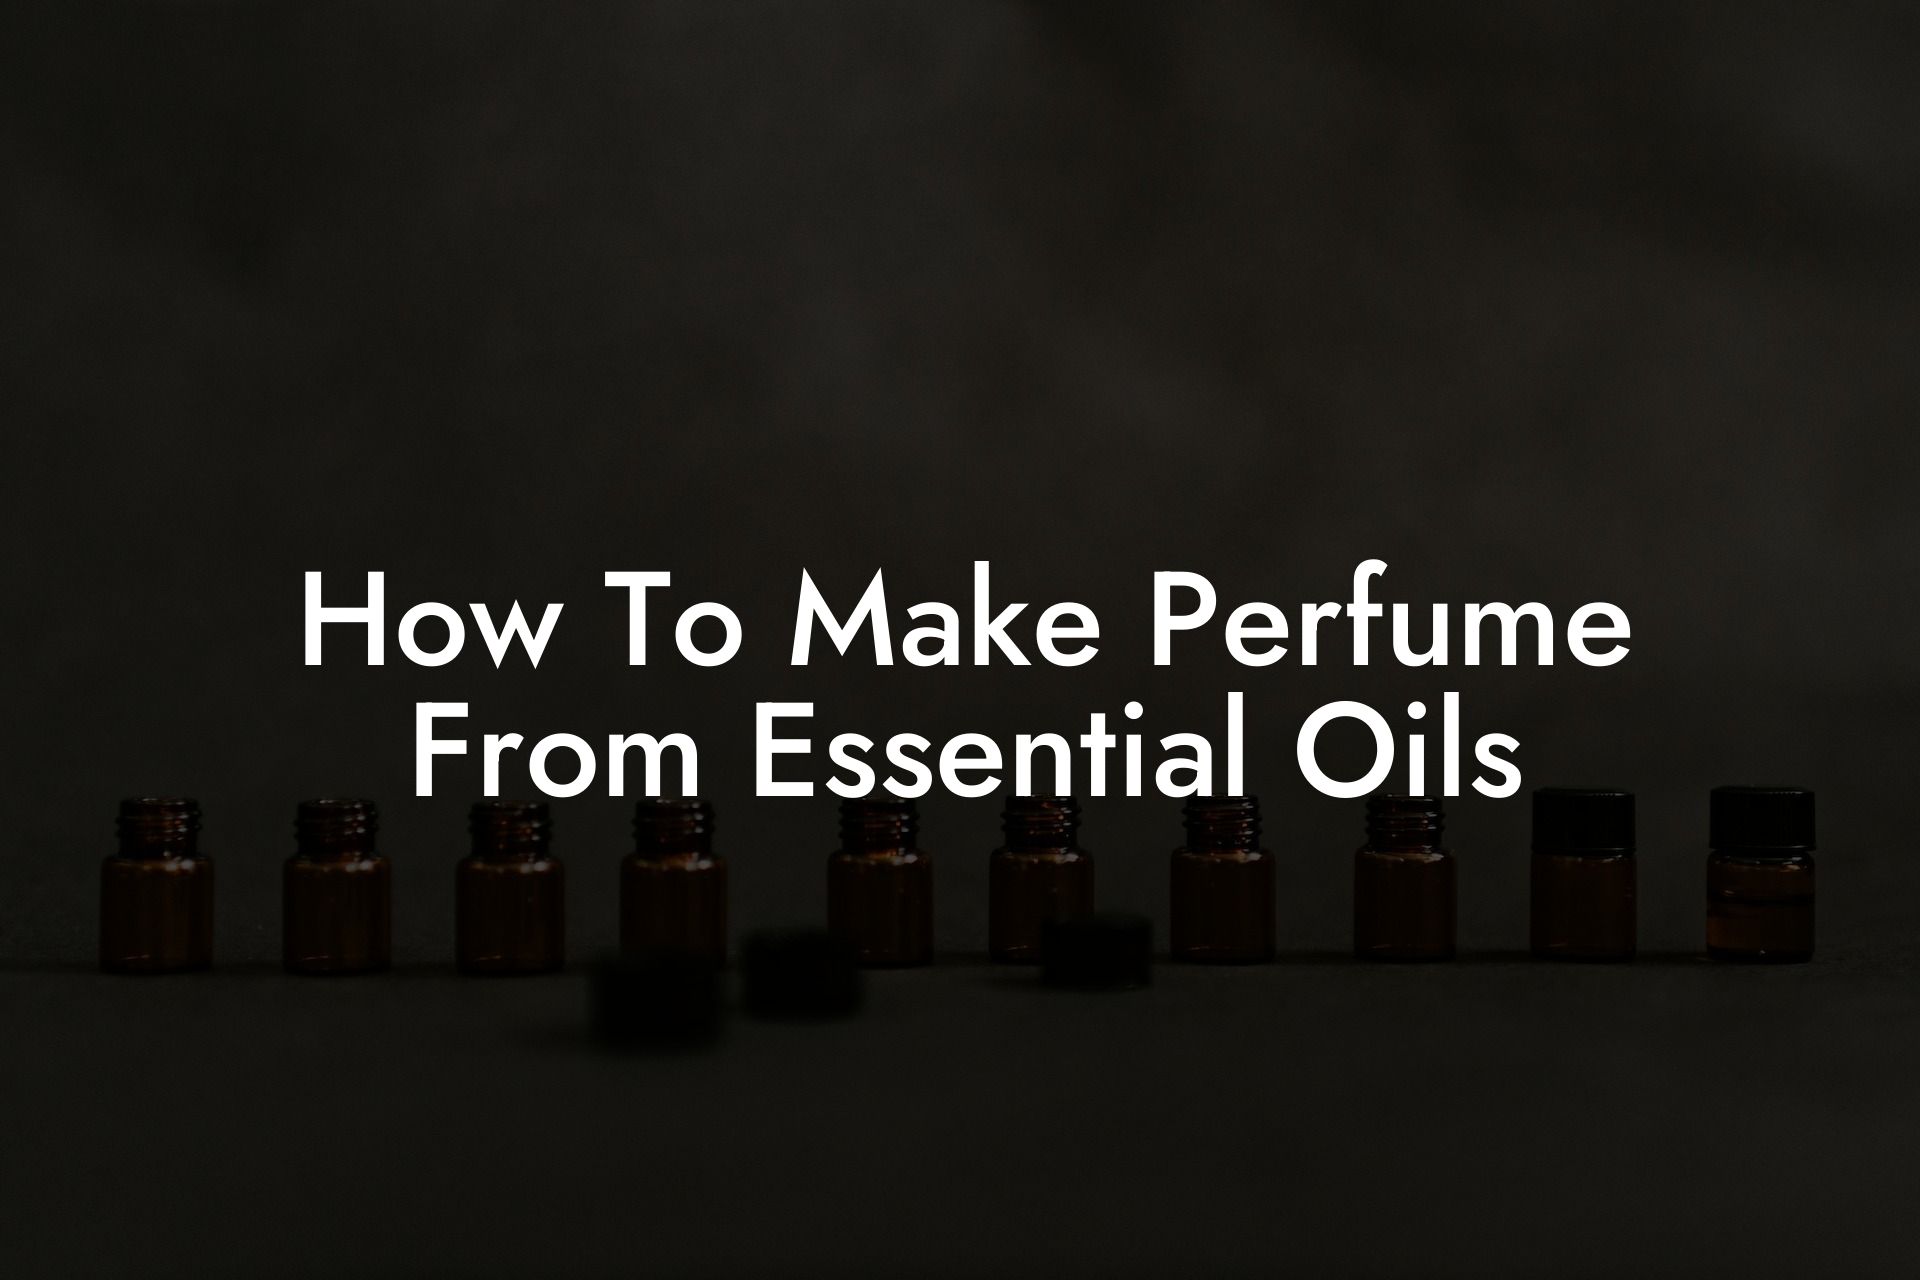 How To Make Perfume From Essential Oils